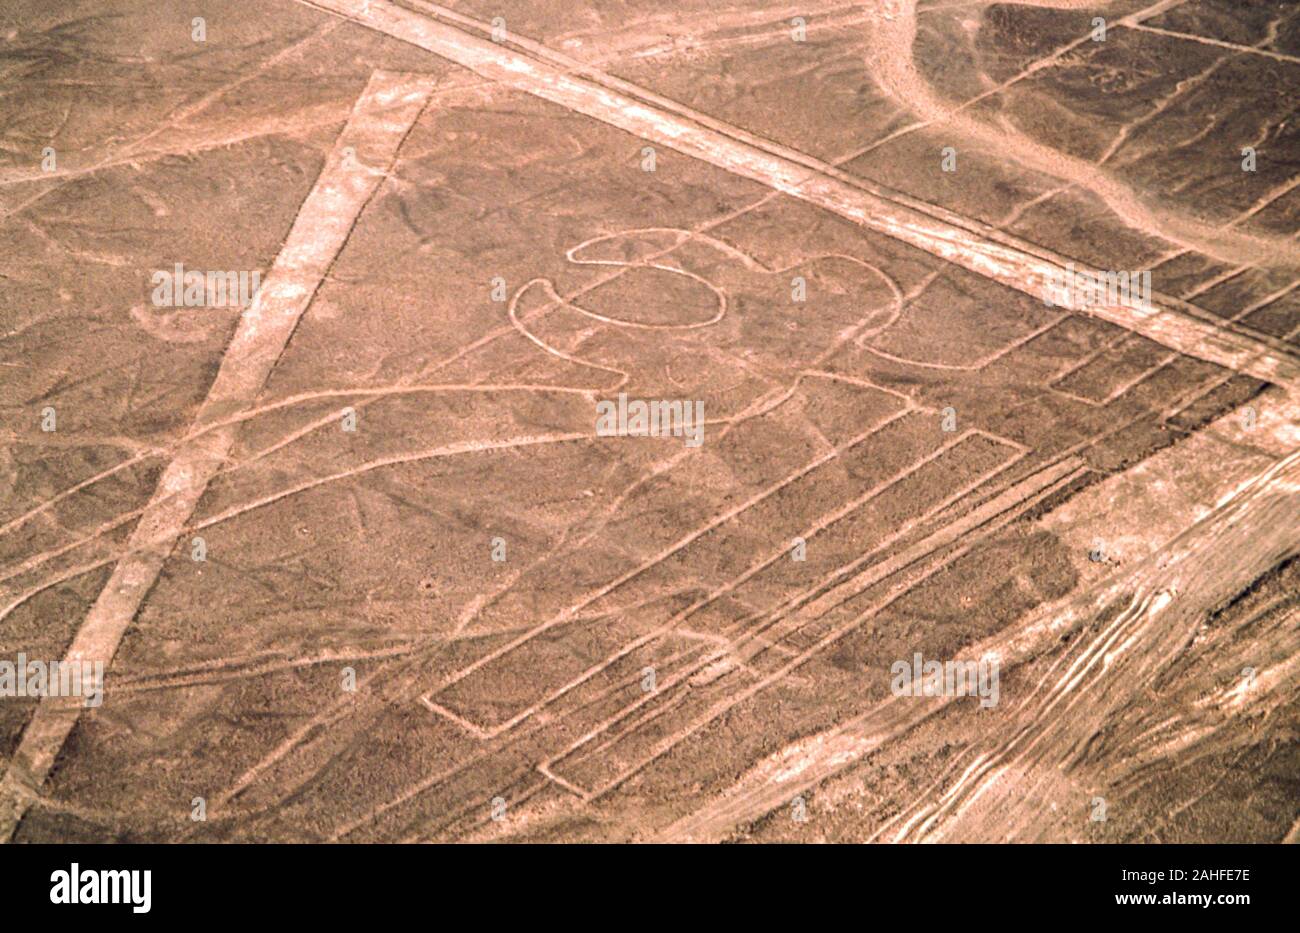 Aerial view of the parrot shape. The Nazca Lines are a group of very large geoglyphs formed by depressions or shallow incisions made in the soil of th Stock Photo